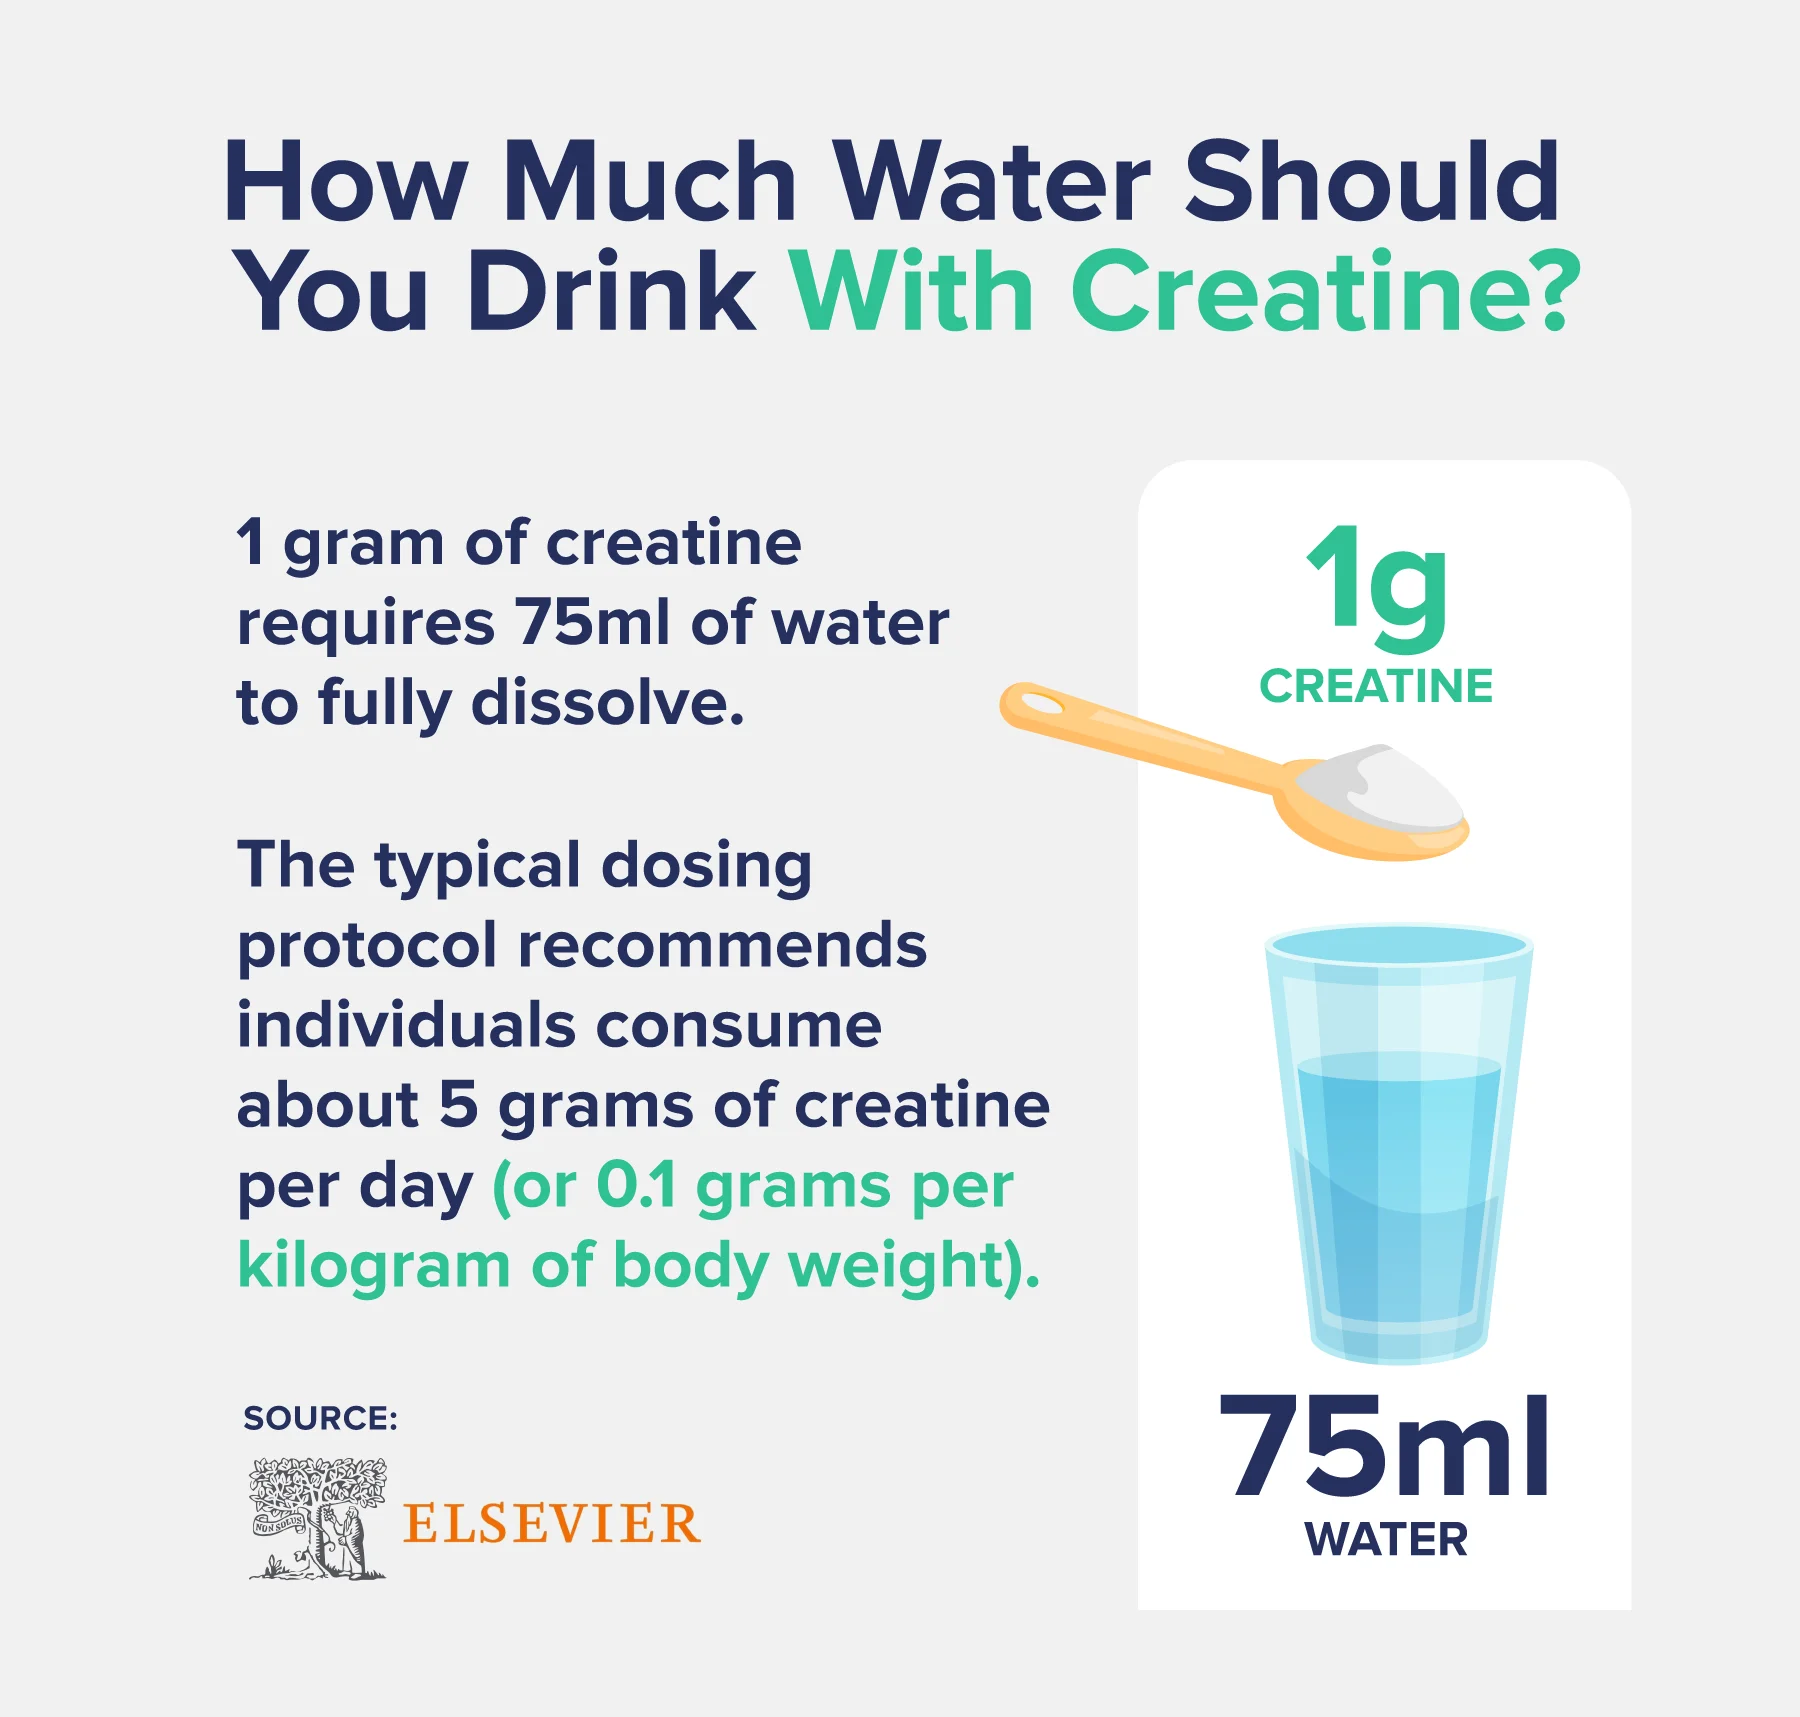 How much water should you drink with creatine?